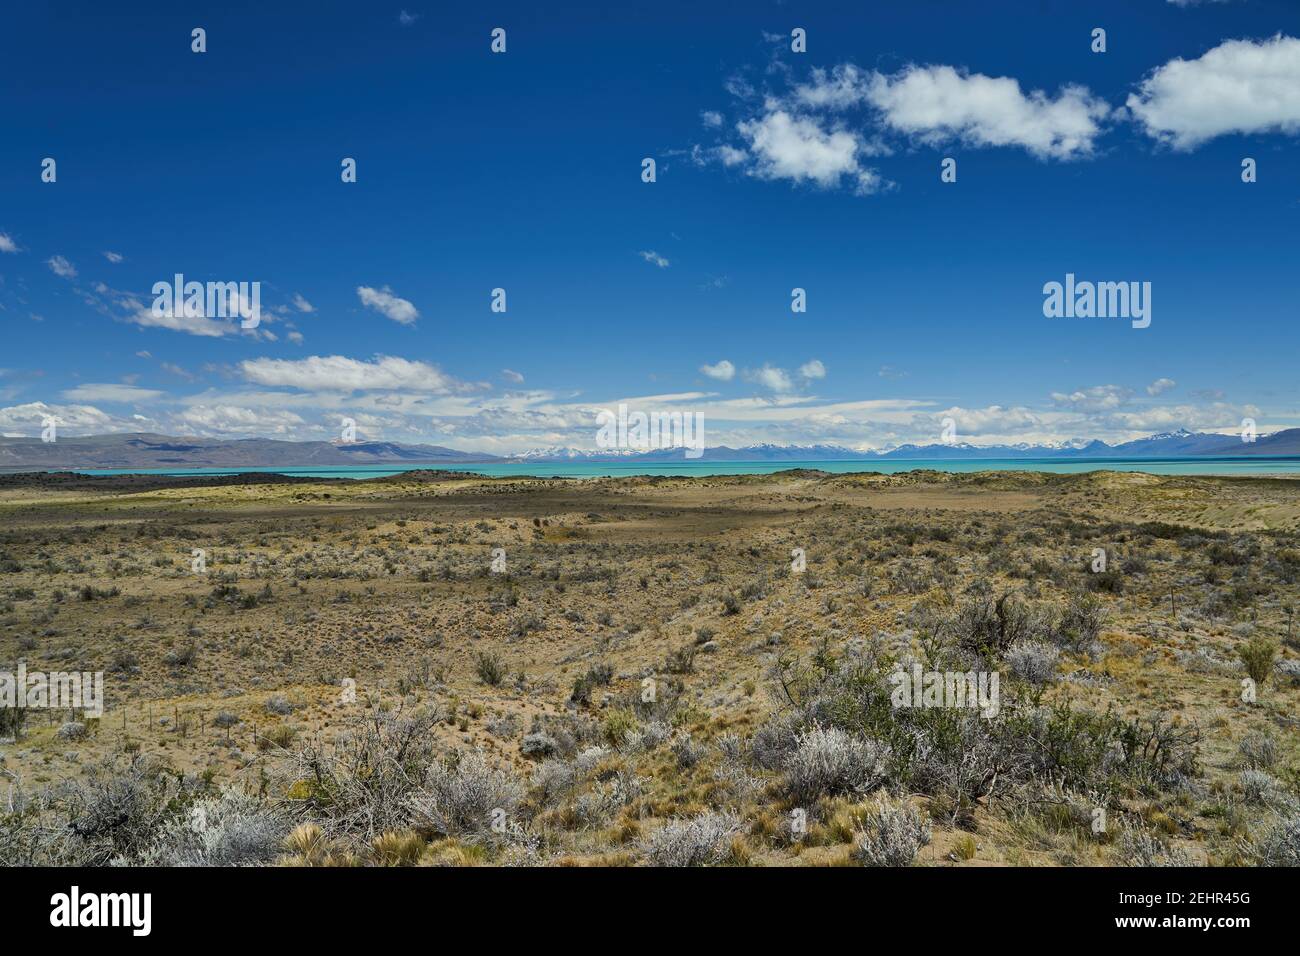 vast open landscape in Patagonia at turquoise Lago Viedma close to Fitz Roy mountain with snow covered mountains of the Andes in the background Stock Photo